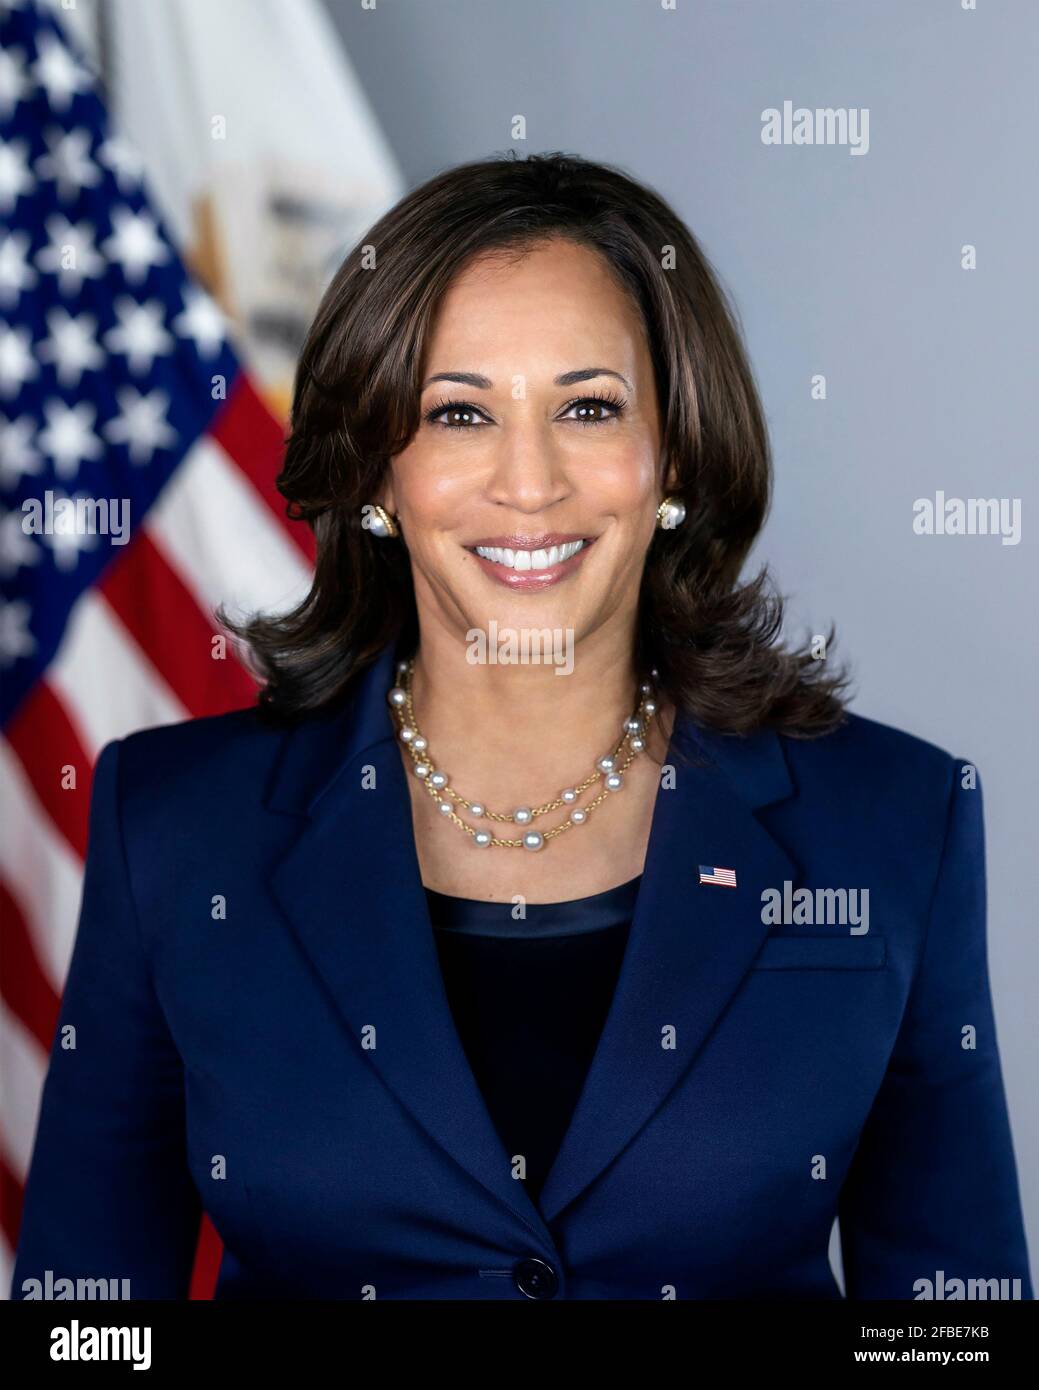 Kamala Harris. Portrait of the 49th Vice President of the United States, Kamala Devi Harris (b. 1964) in March 2021. Official White House photo . Stock Photo